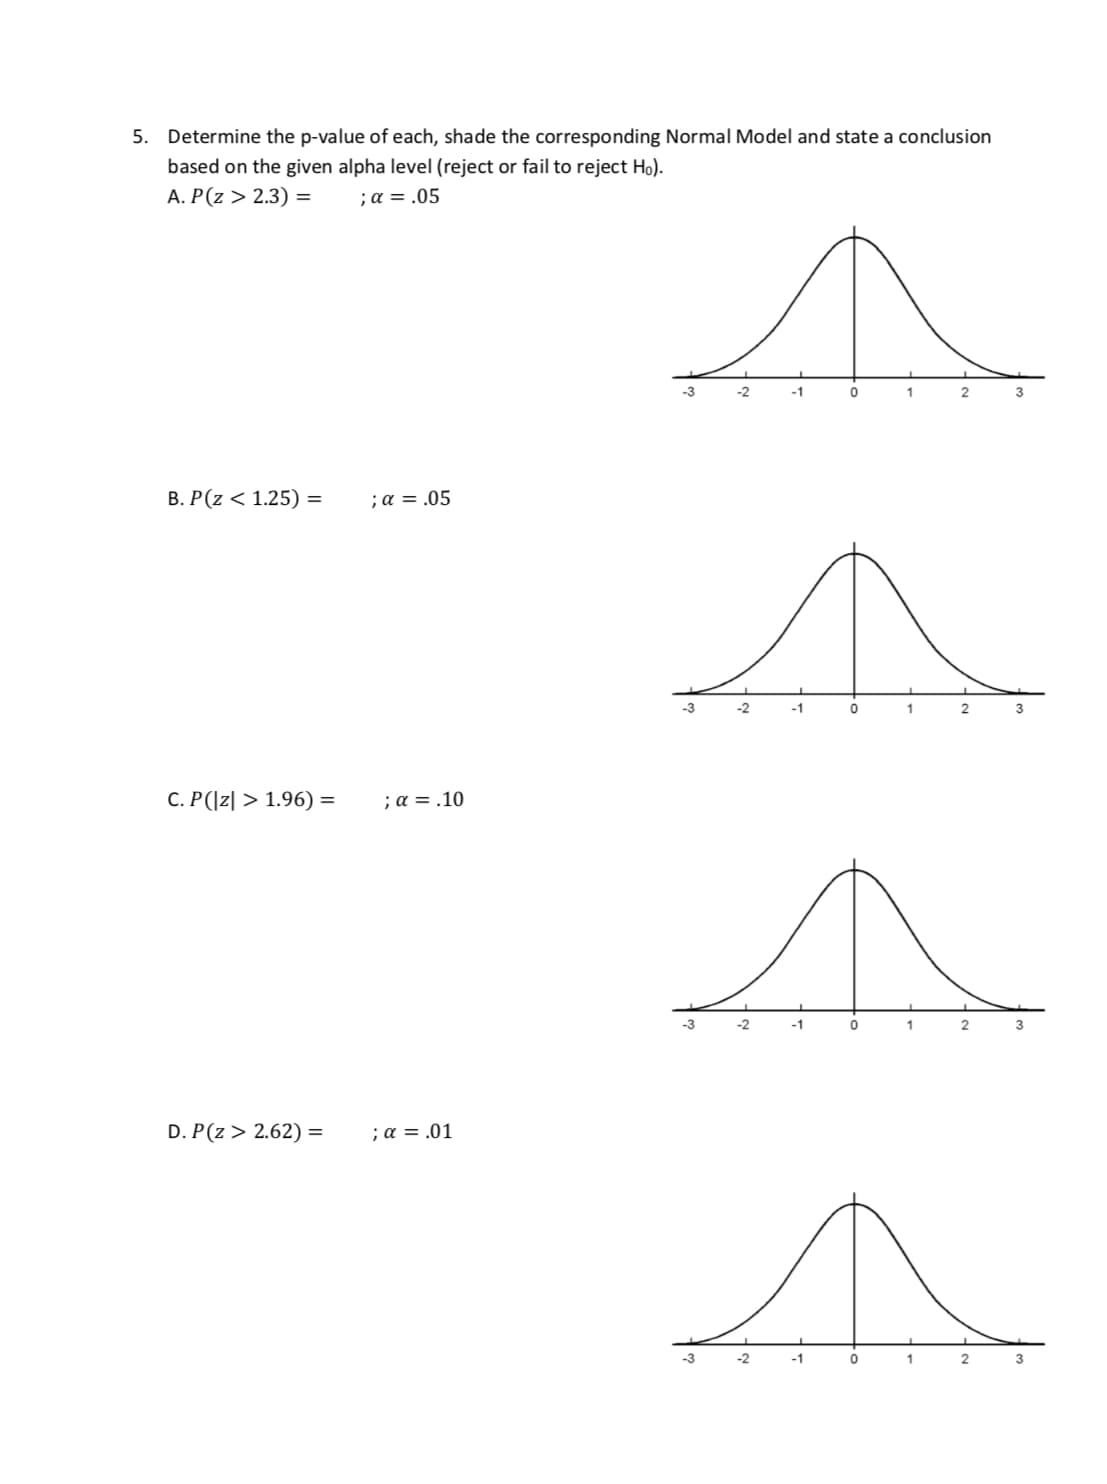 5.
Determine the p-value of each, shade the corresponding Normal Model and state a conclusion
based on the given alpha level (reject or fail to reject Ho)
A, P(z > 2.3) = ;α=.05
3 21
2
B. P(z < 1.25) =
; α = .05
2
3
C. P(z > 1.96) -
;α=.10
-3
-2
2
D. P(z > 2.62) =
; α = .01
-2
2
